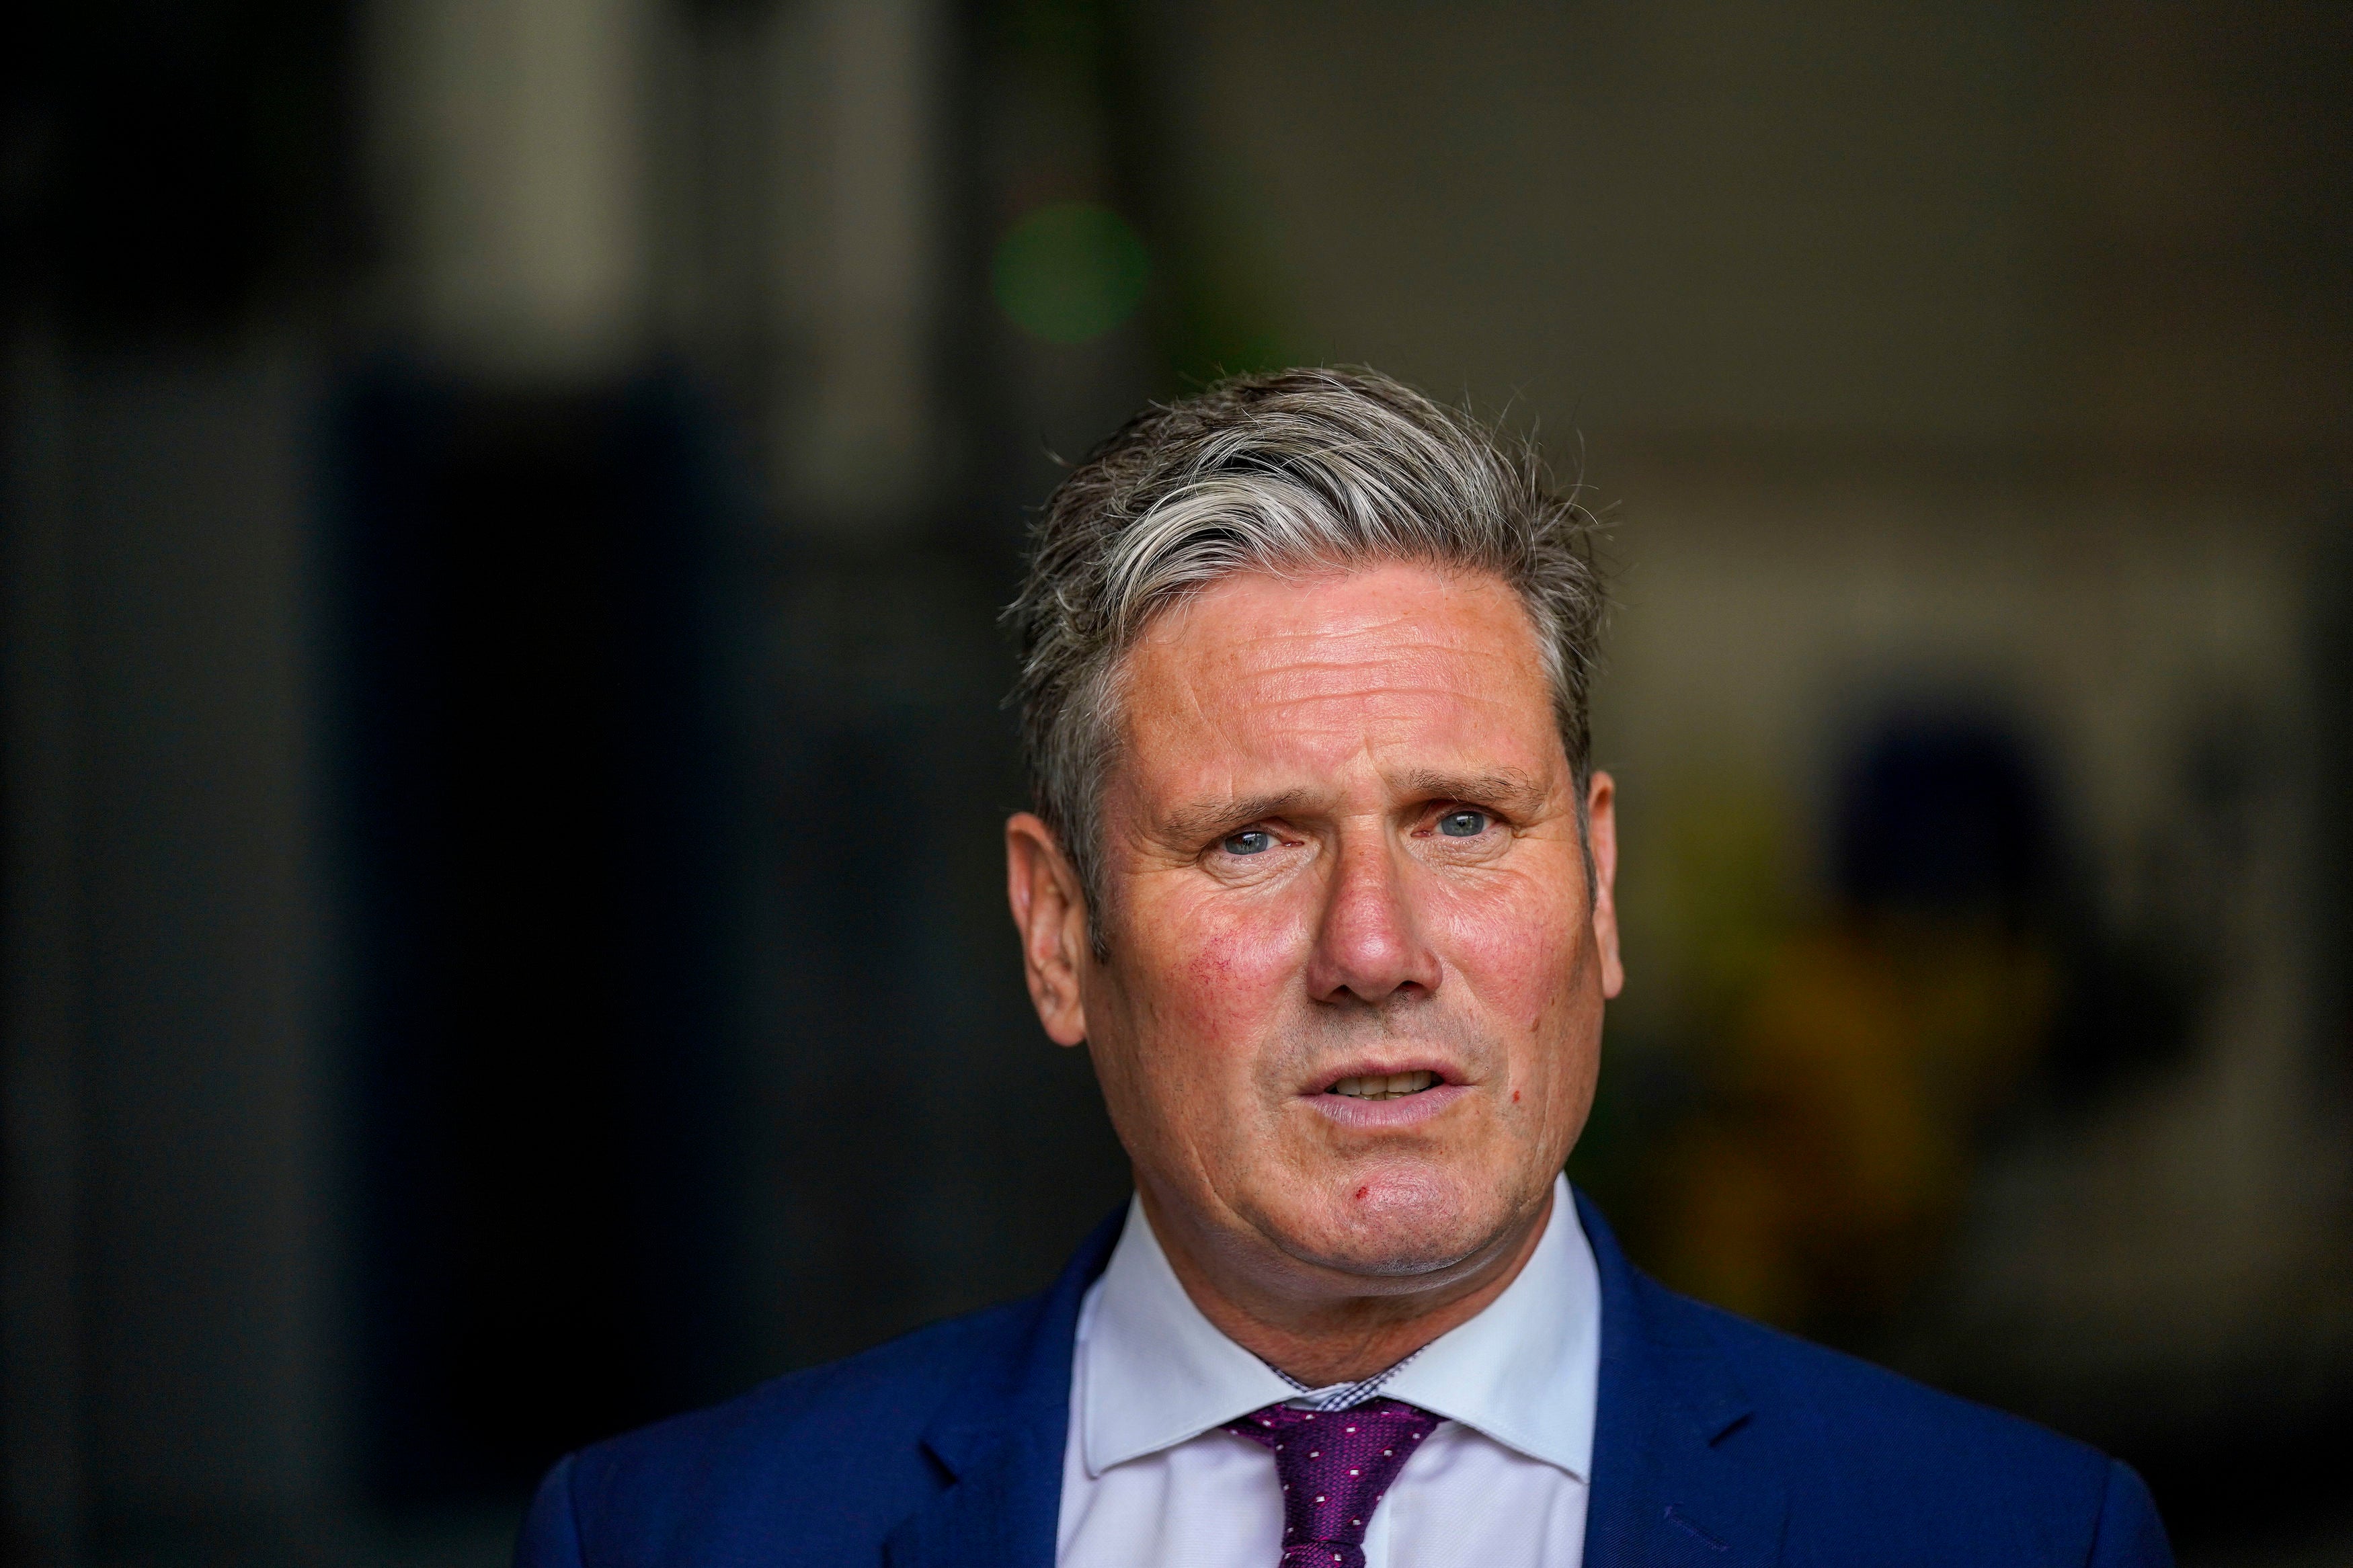 Sir Keir Starmer will try to unite the Labour party around popular policy